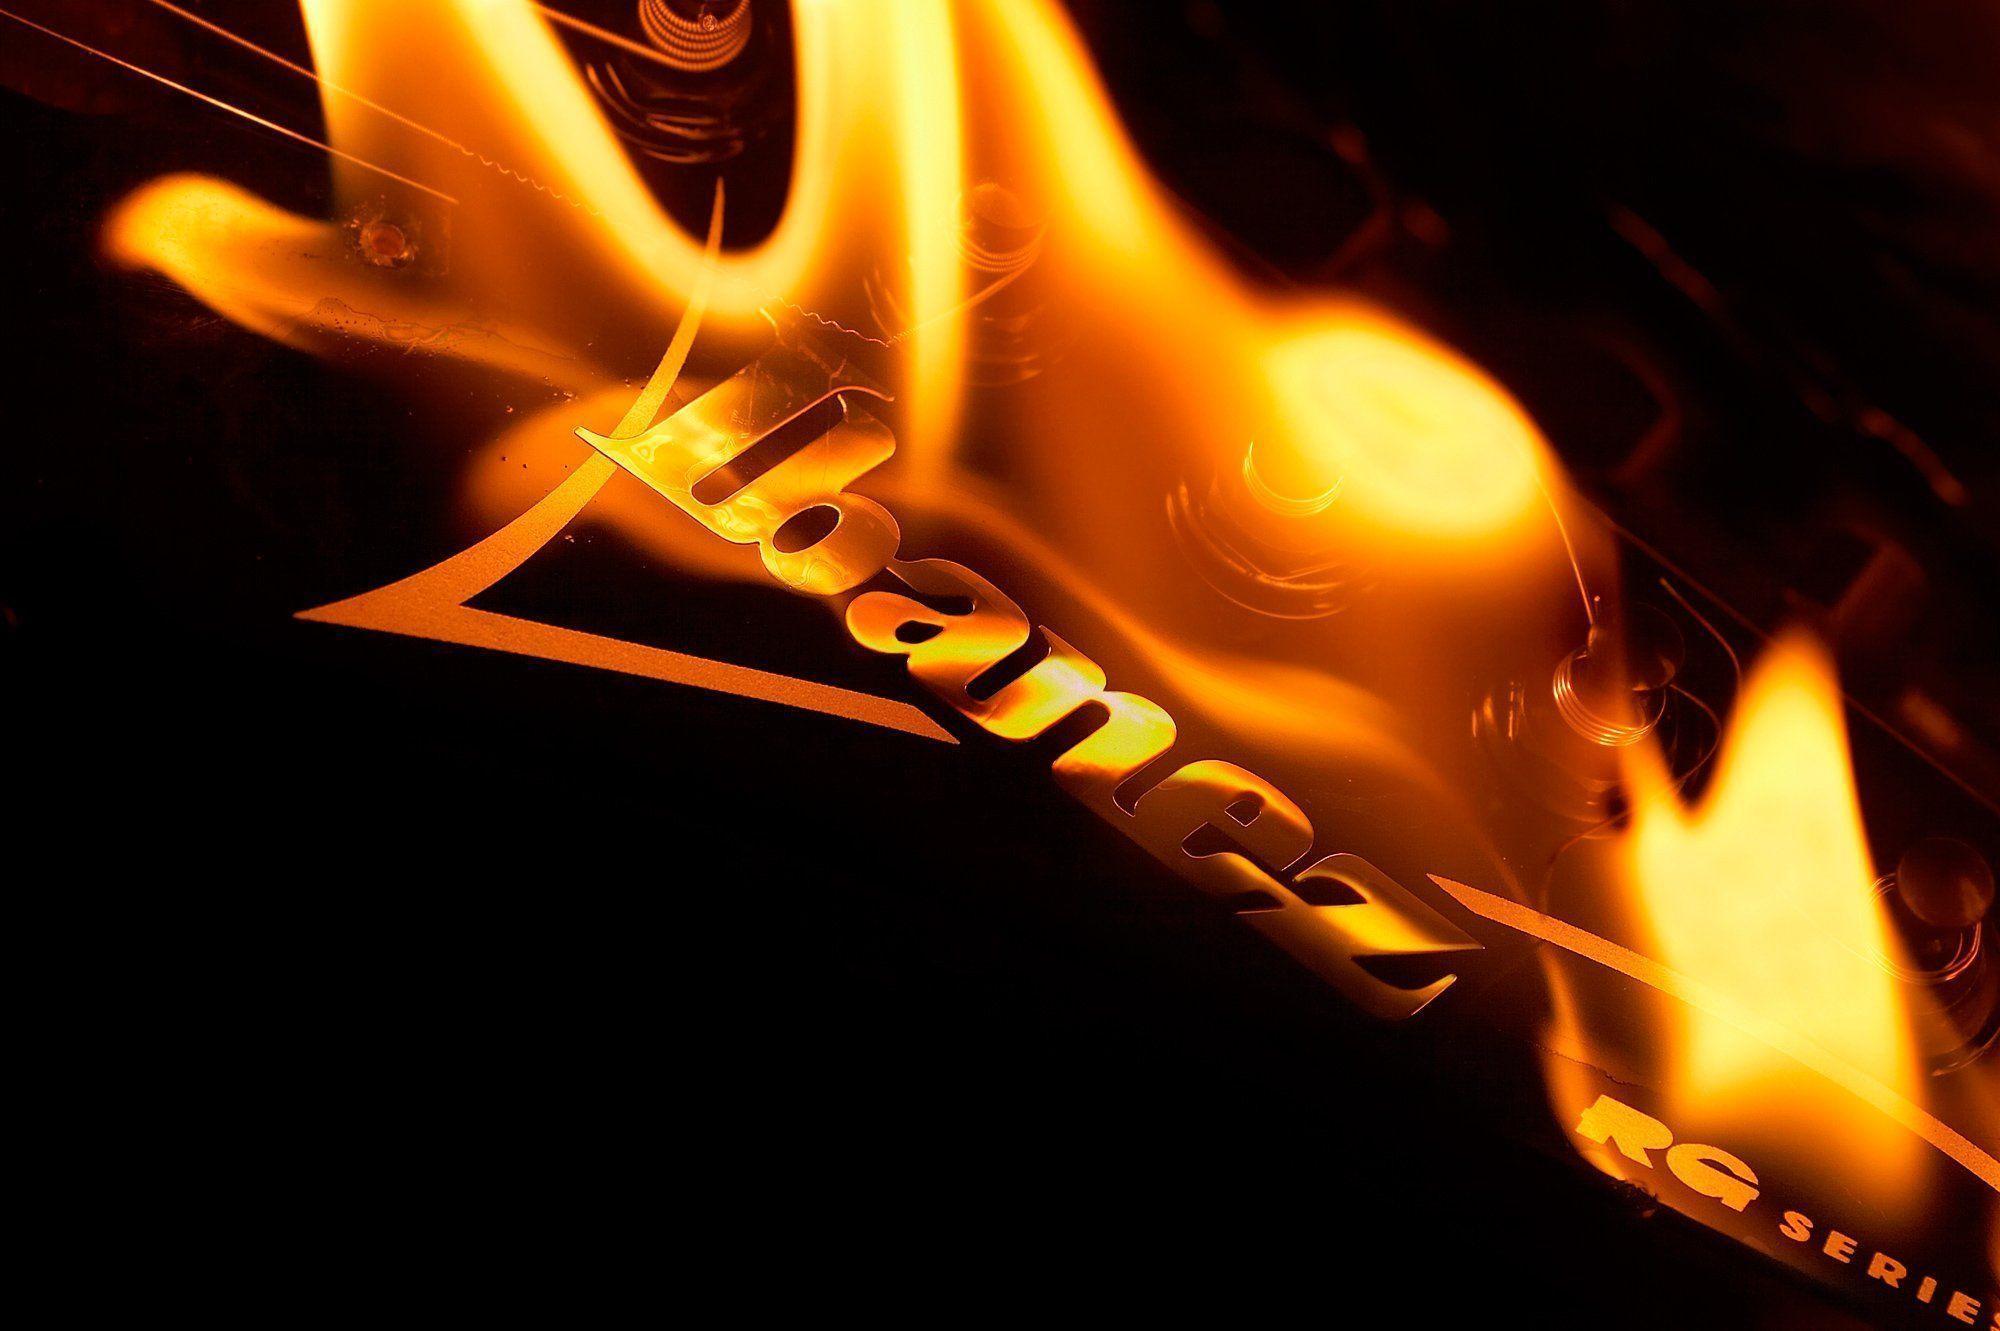 Whoever was looking for that old Ibanez / fire wallpaper